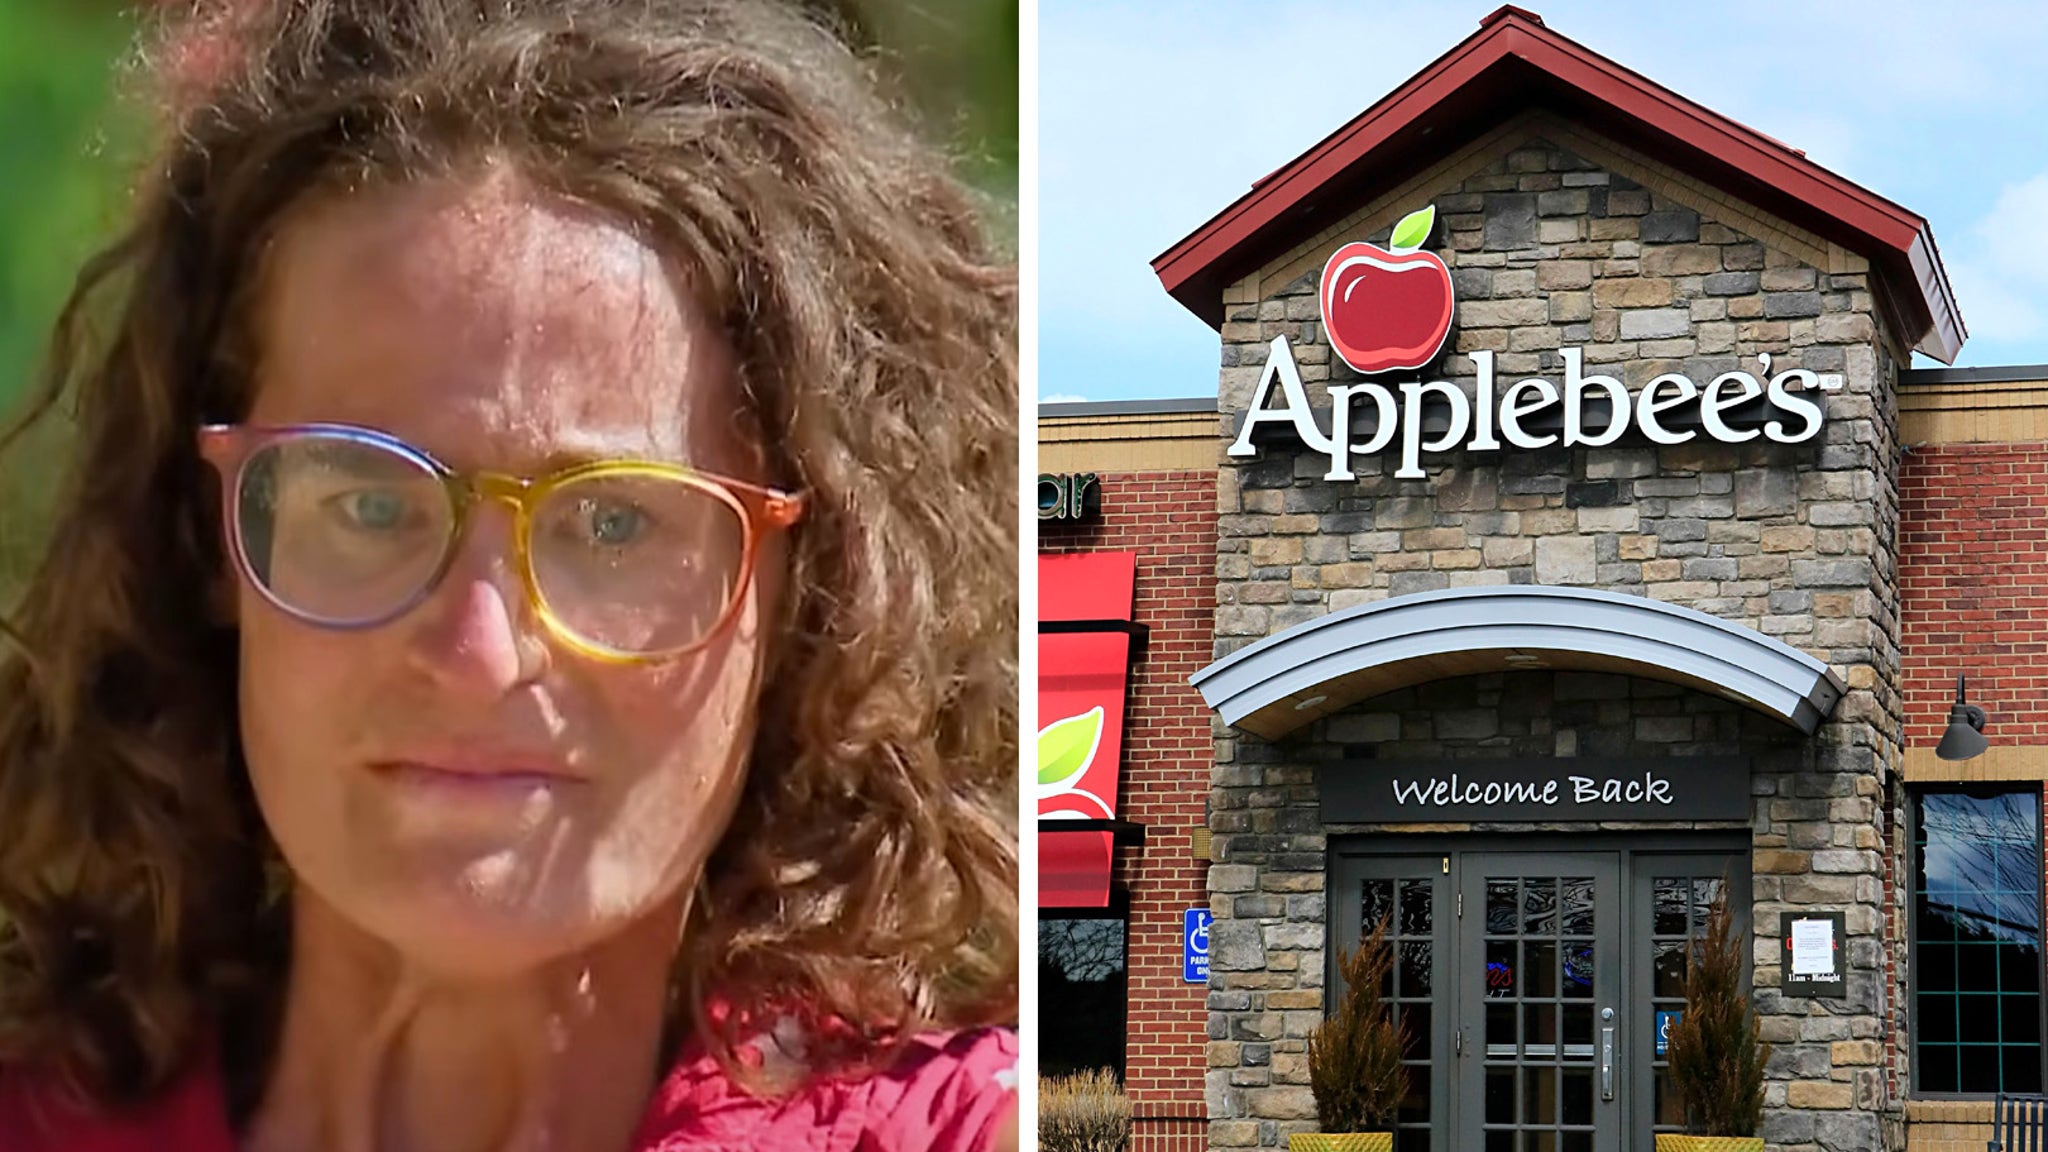 Survivor Contestant with Severe Food Allergies Has Epic Tantrum After Missing Out on Applebee's